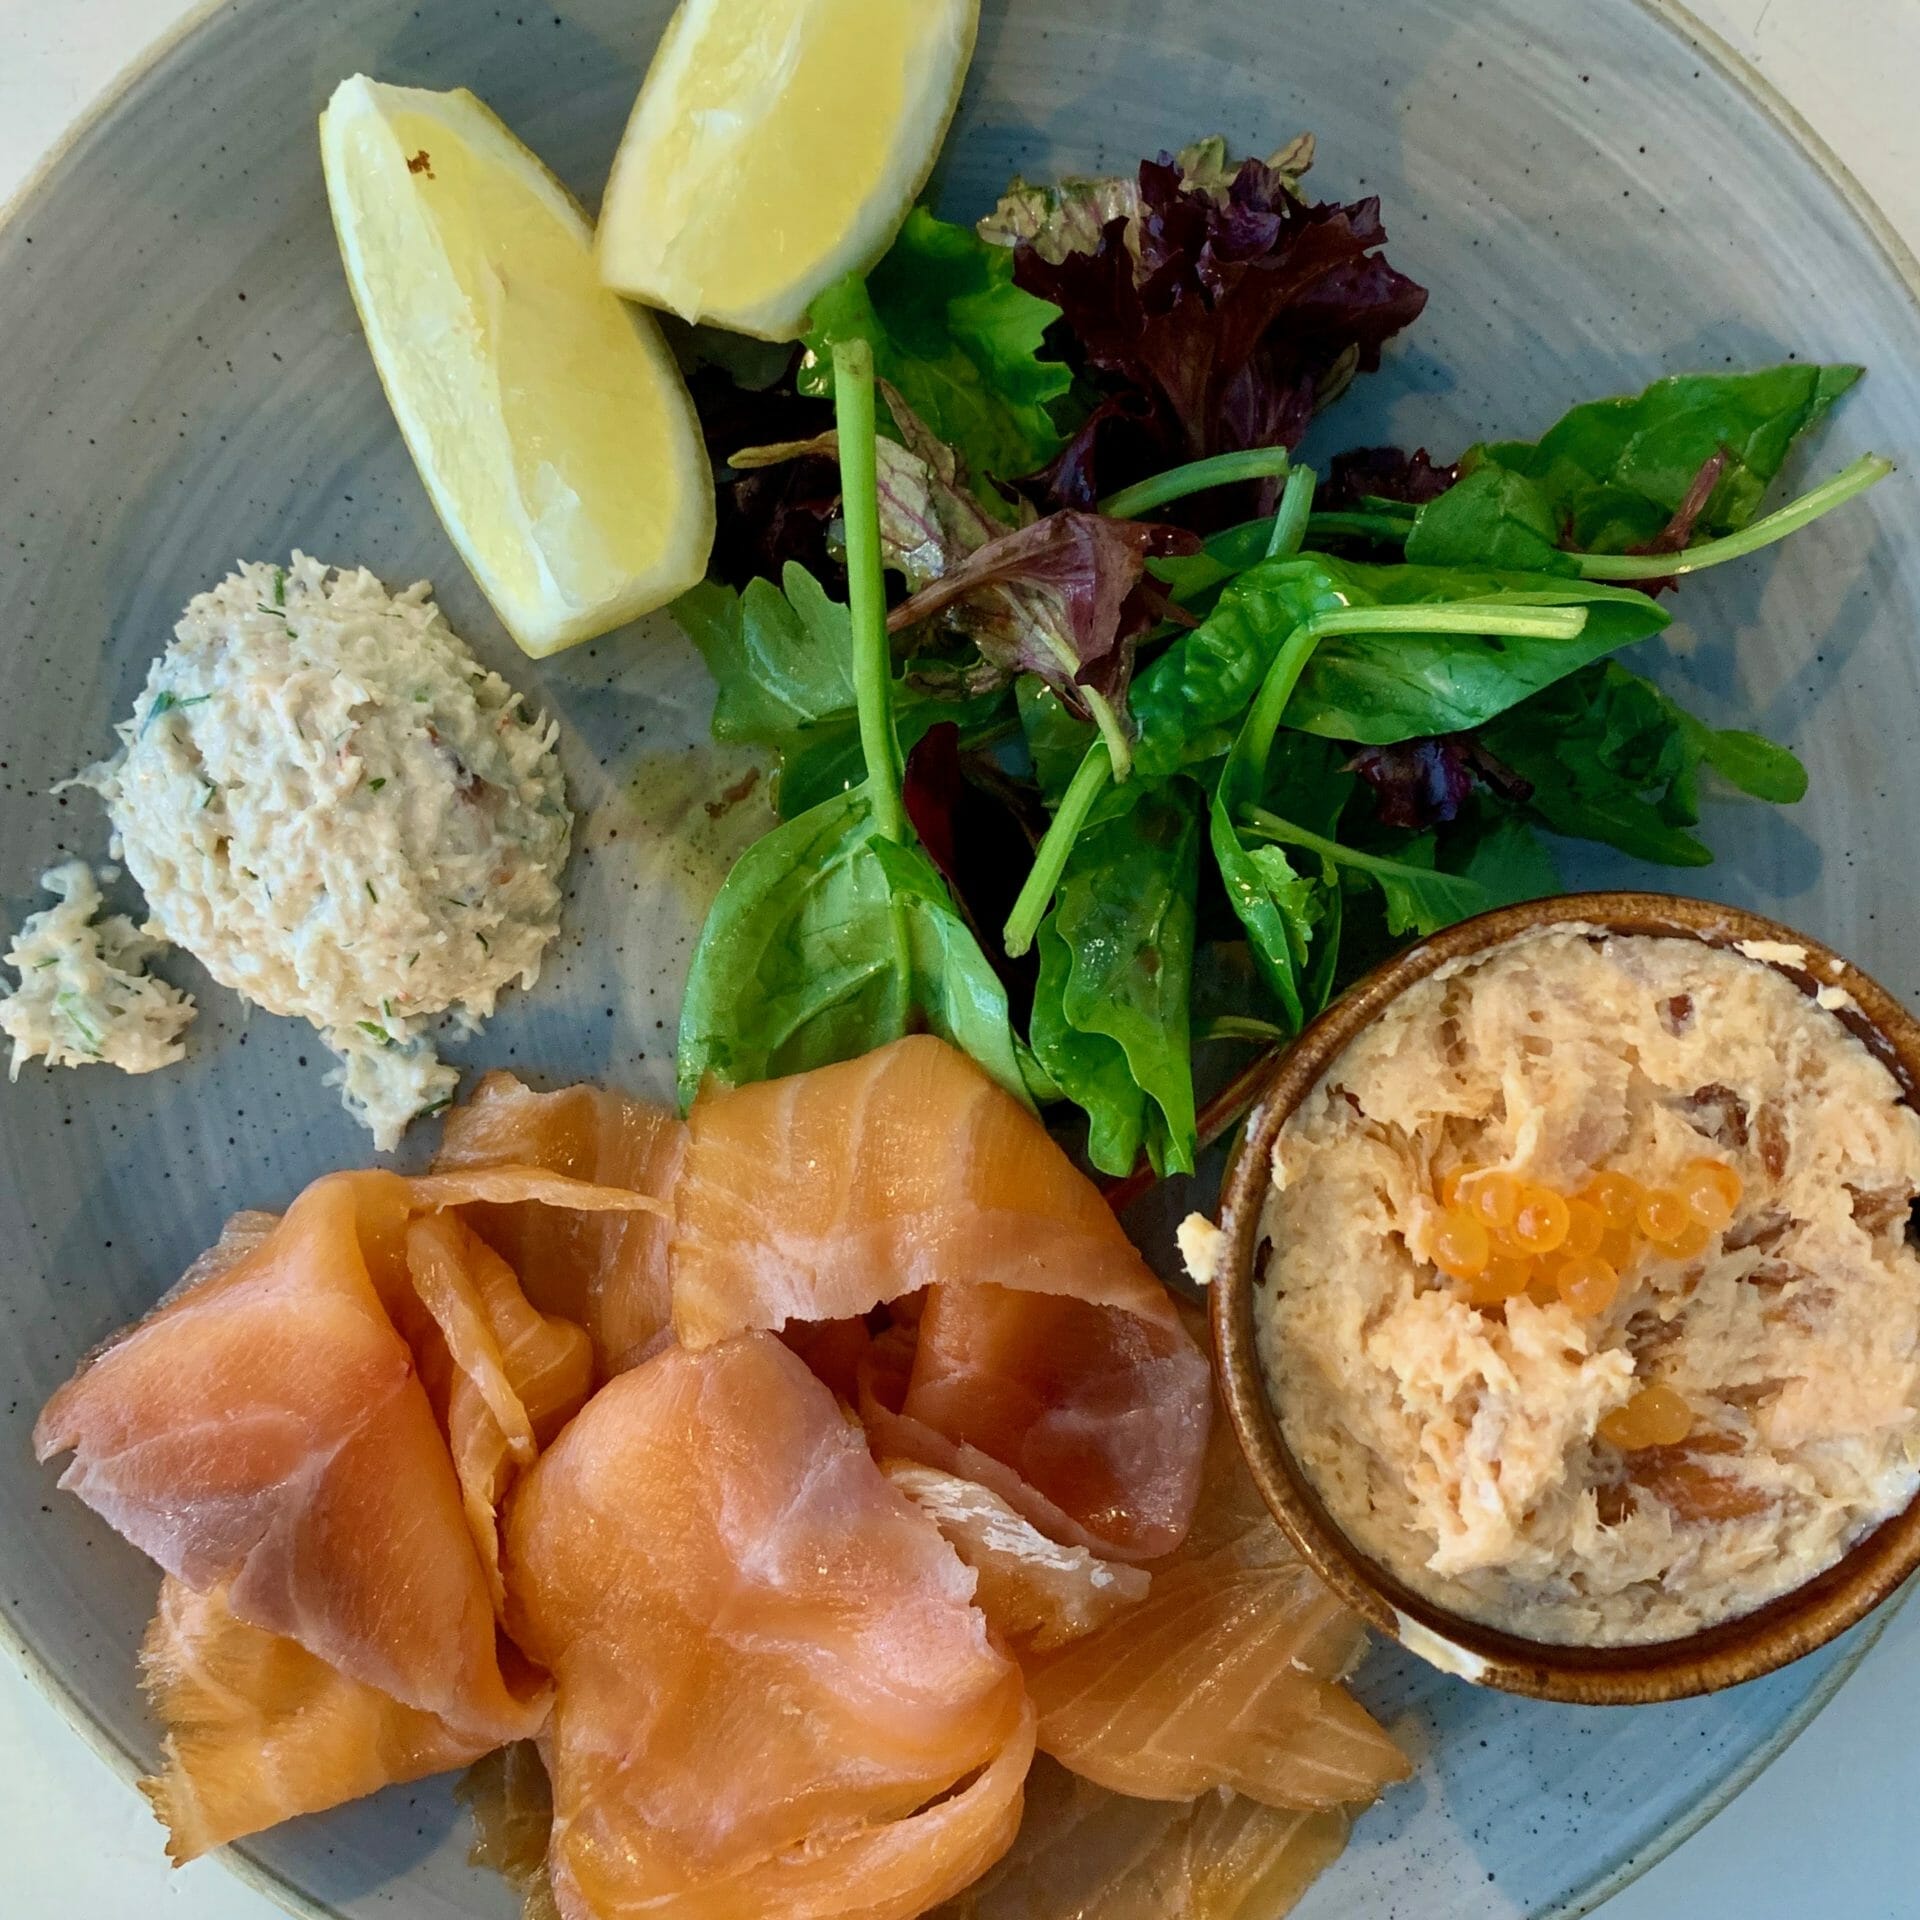 Smoked salmon, trout pate and crab meat